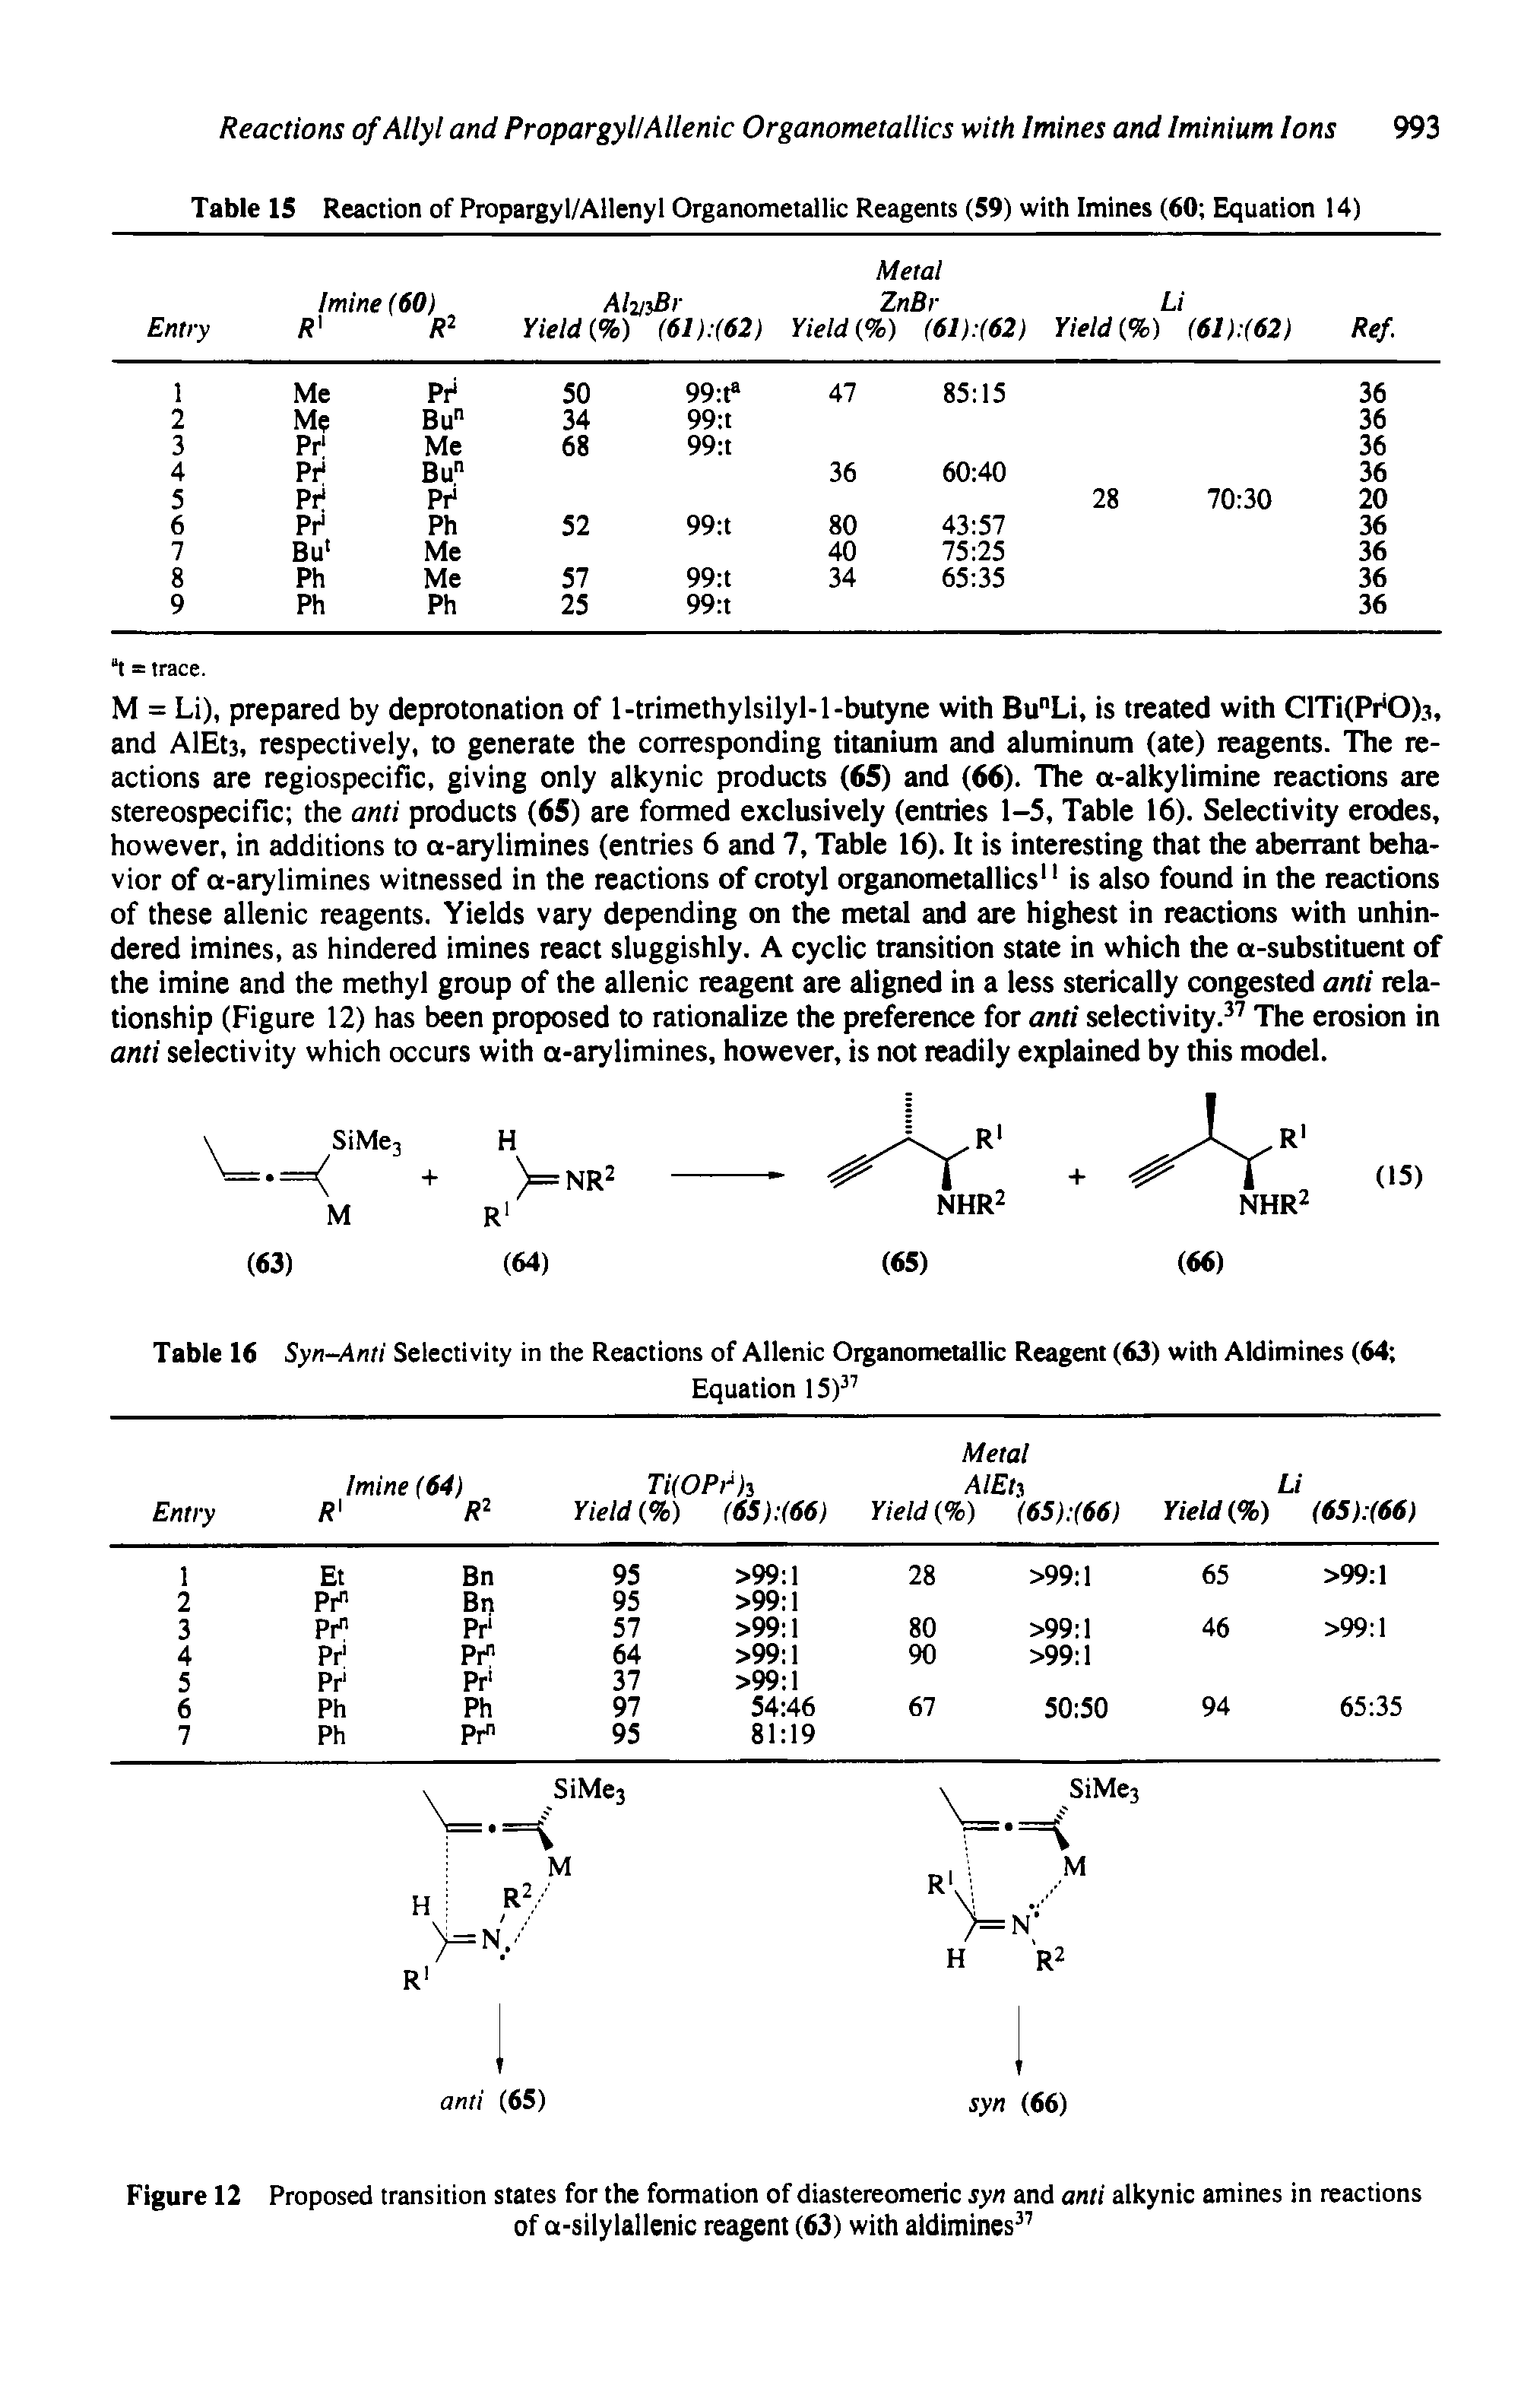 Table 16 Syn-Anti Selectivity in the Reactions of Allenic Organometallic Reagent (63) with Aldimines (64 Equation 15) ...